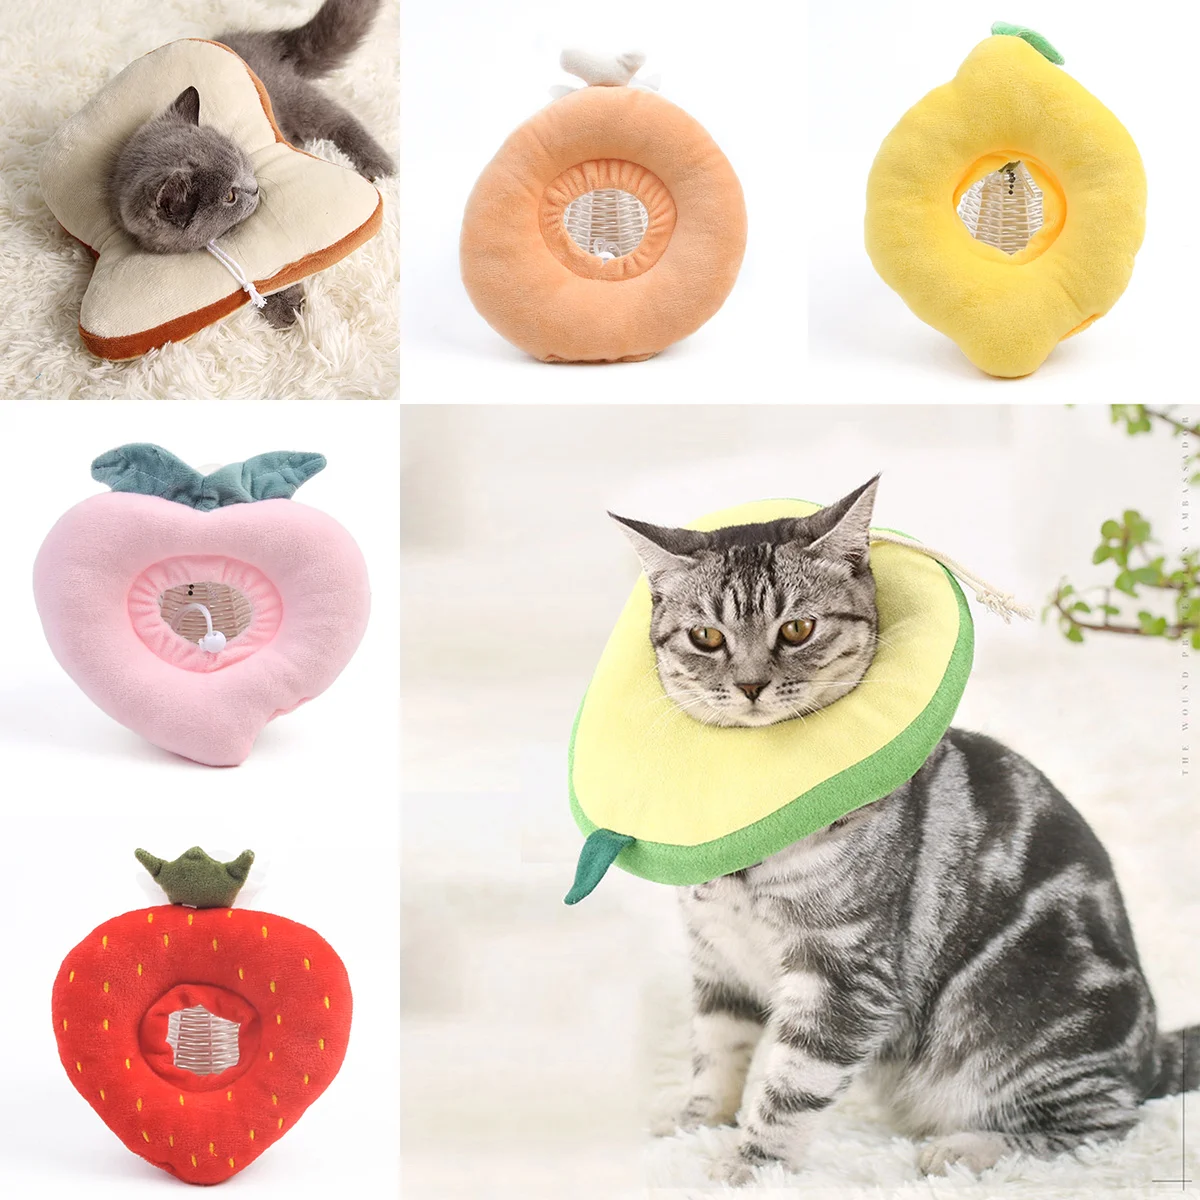 

Prevent Bite Neck Ring For Pets Soft Toast Avocado Shaped Cotton Pet Elizabethan Collar Dog Cat Adjustable Wound Healing Collar